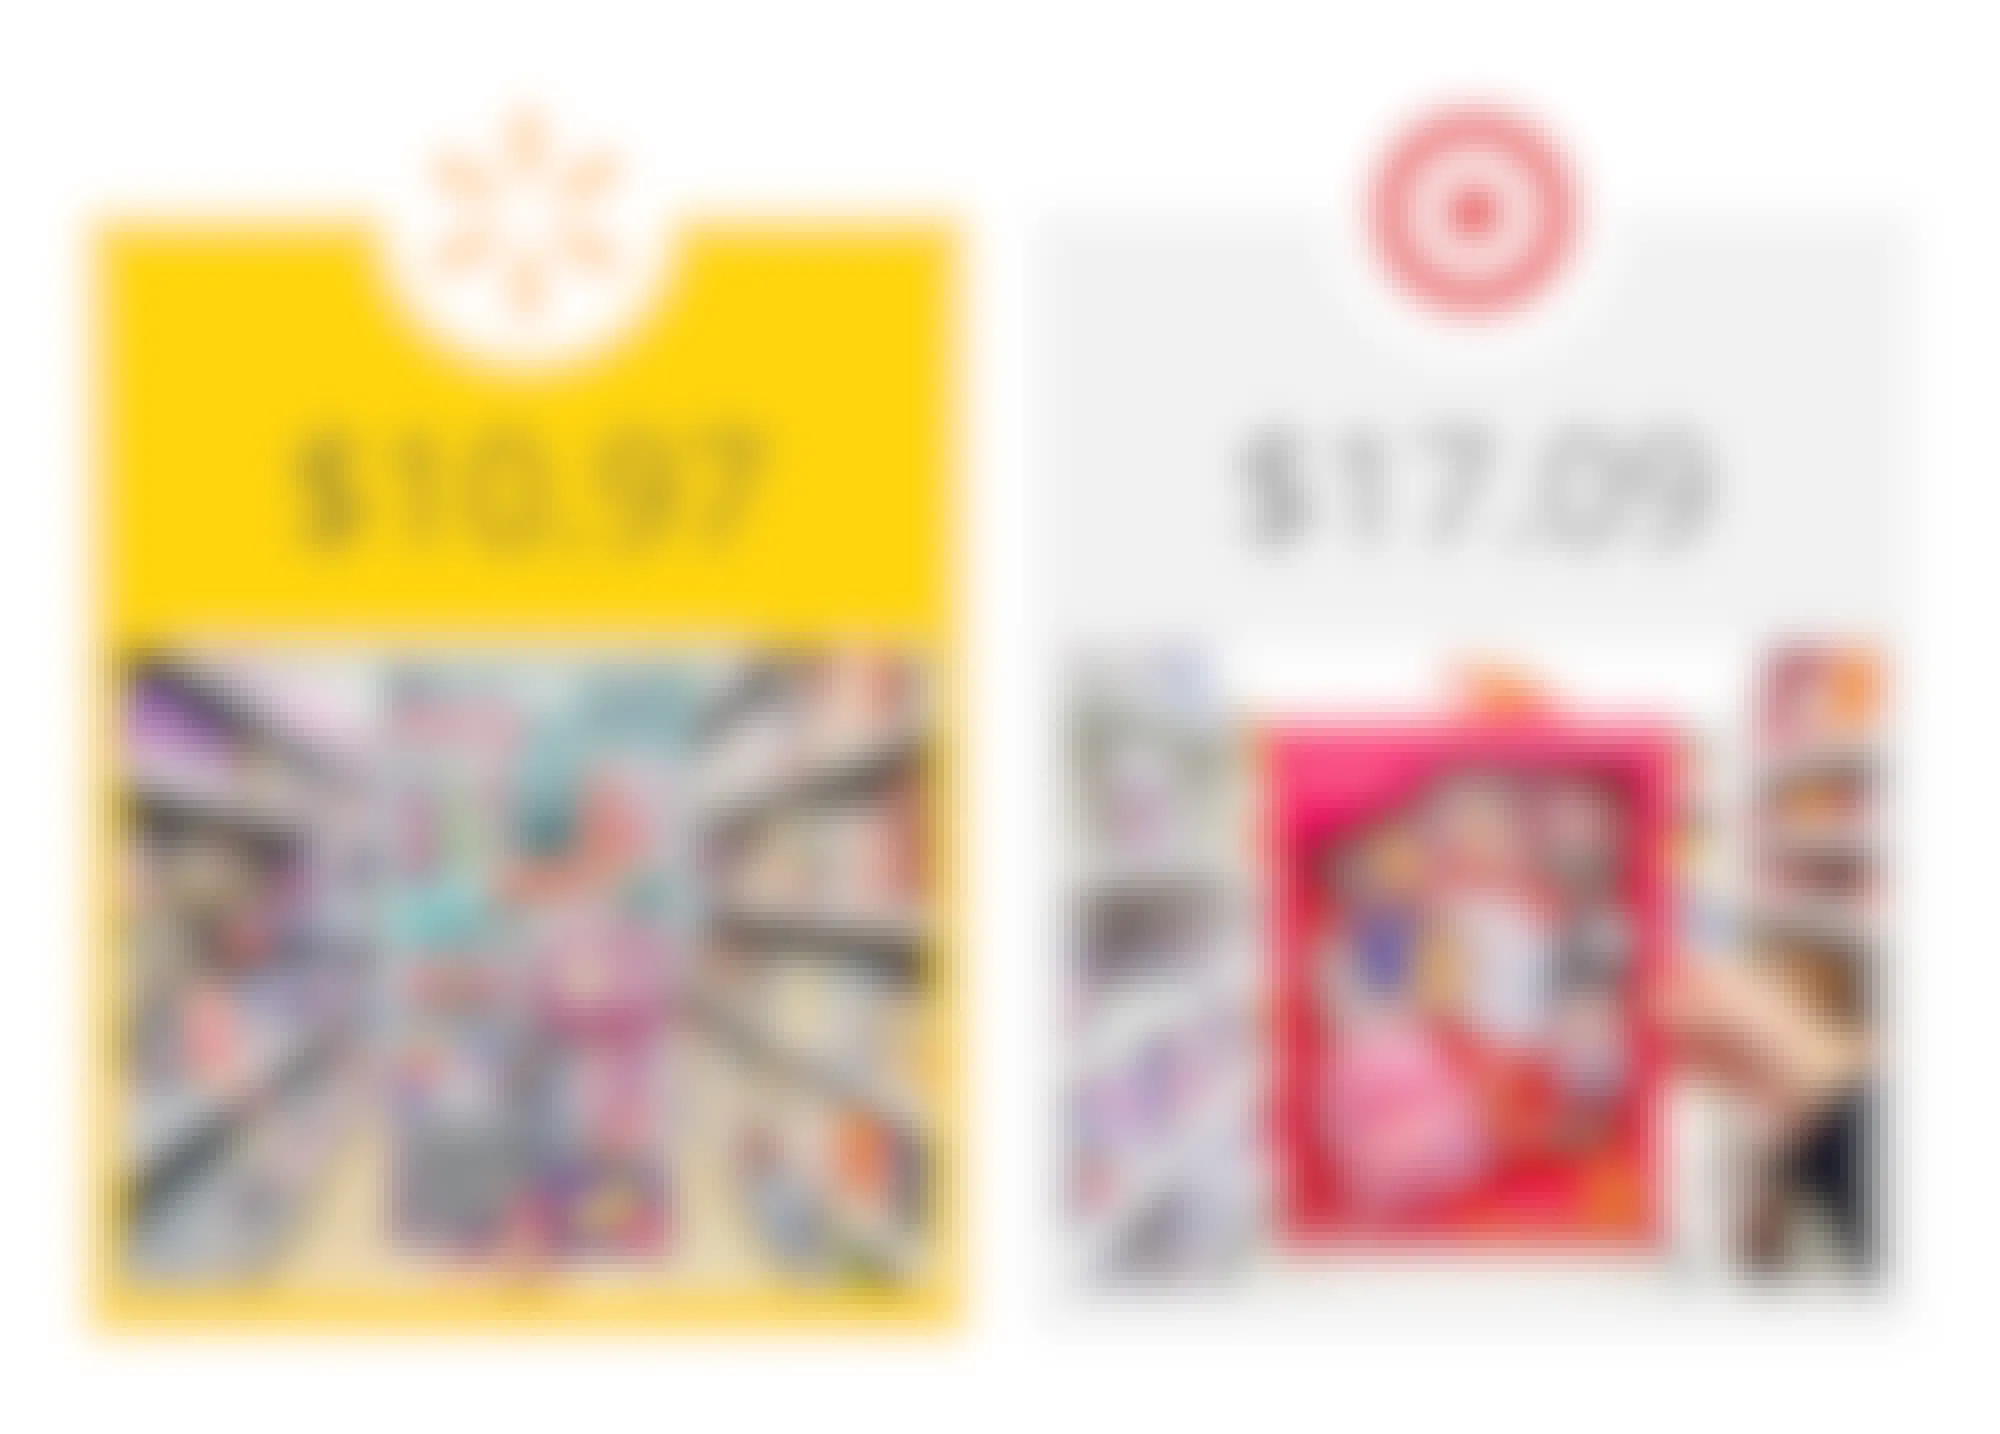 walmart as the winner on a graphic showing price comparison between target's our generation and walmart's my life as doll school supplies